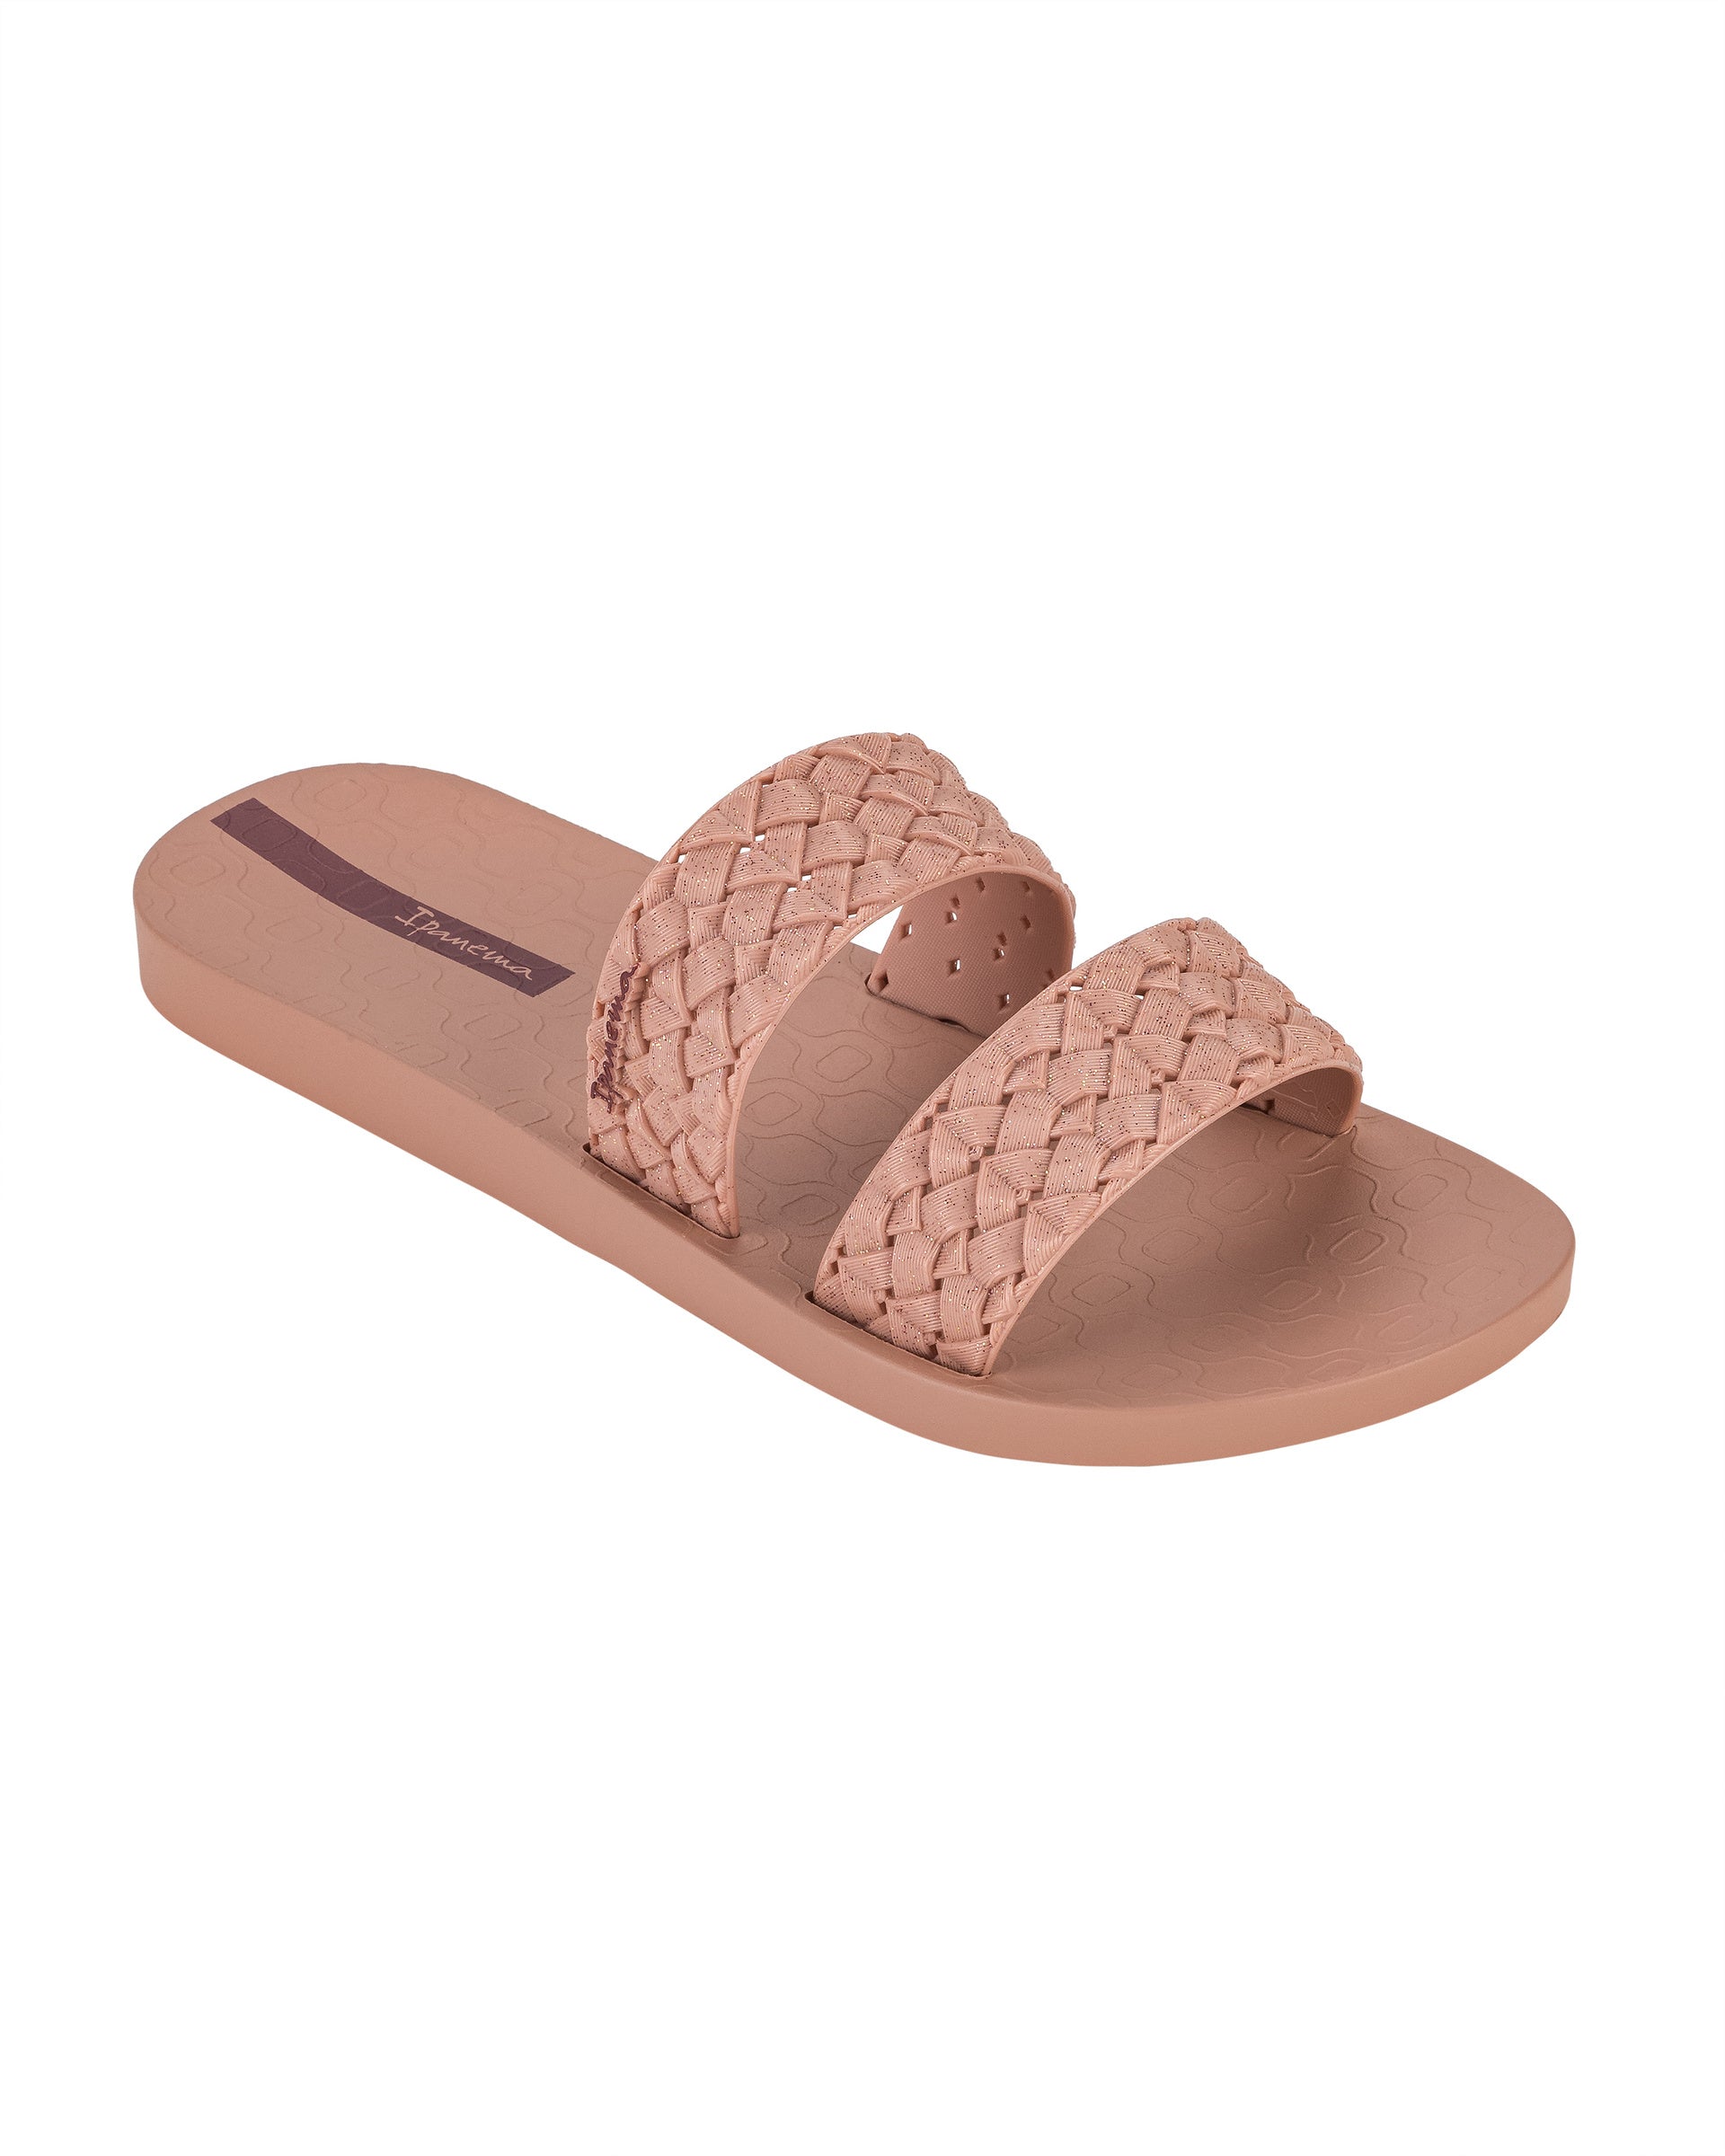 Angled view of a pink Ipanema Renda women's slide with braided pink glitter straps.